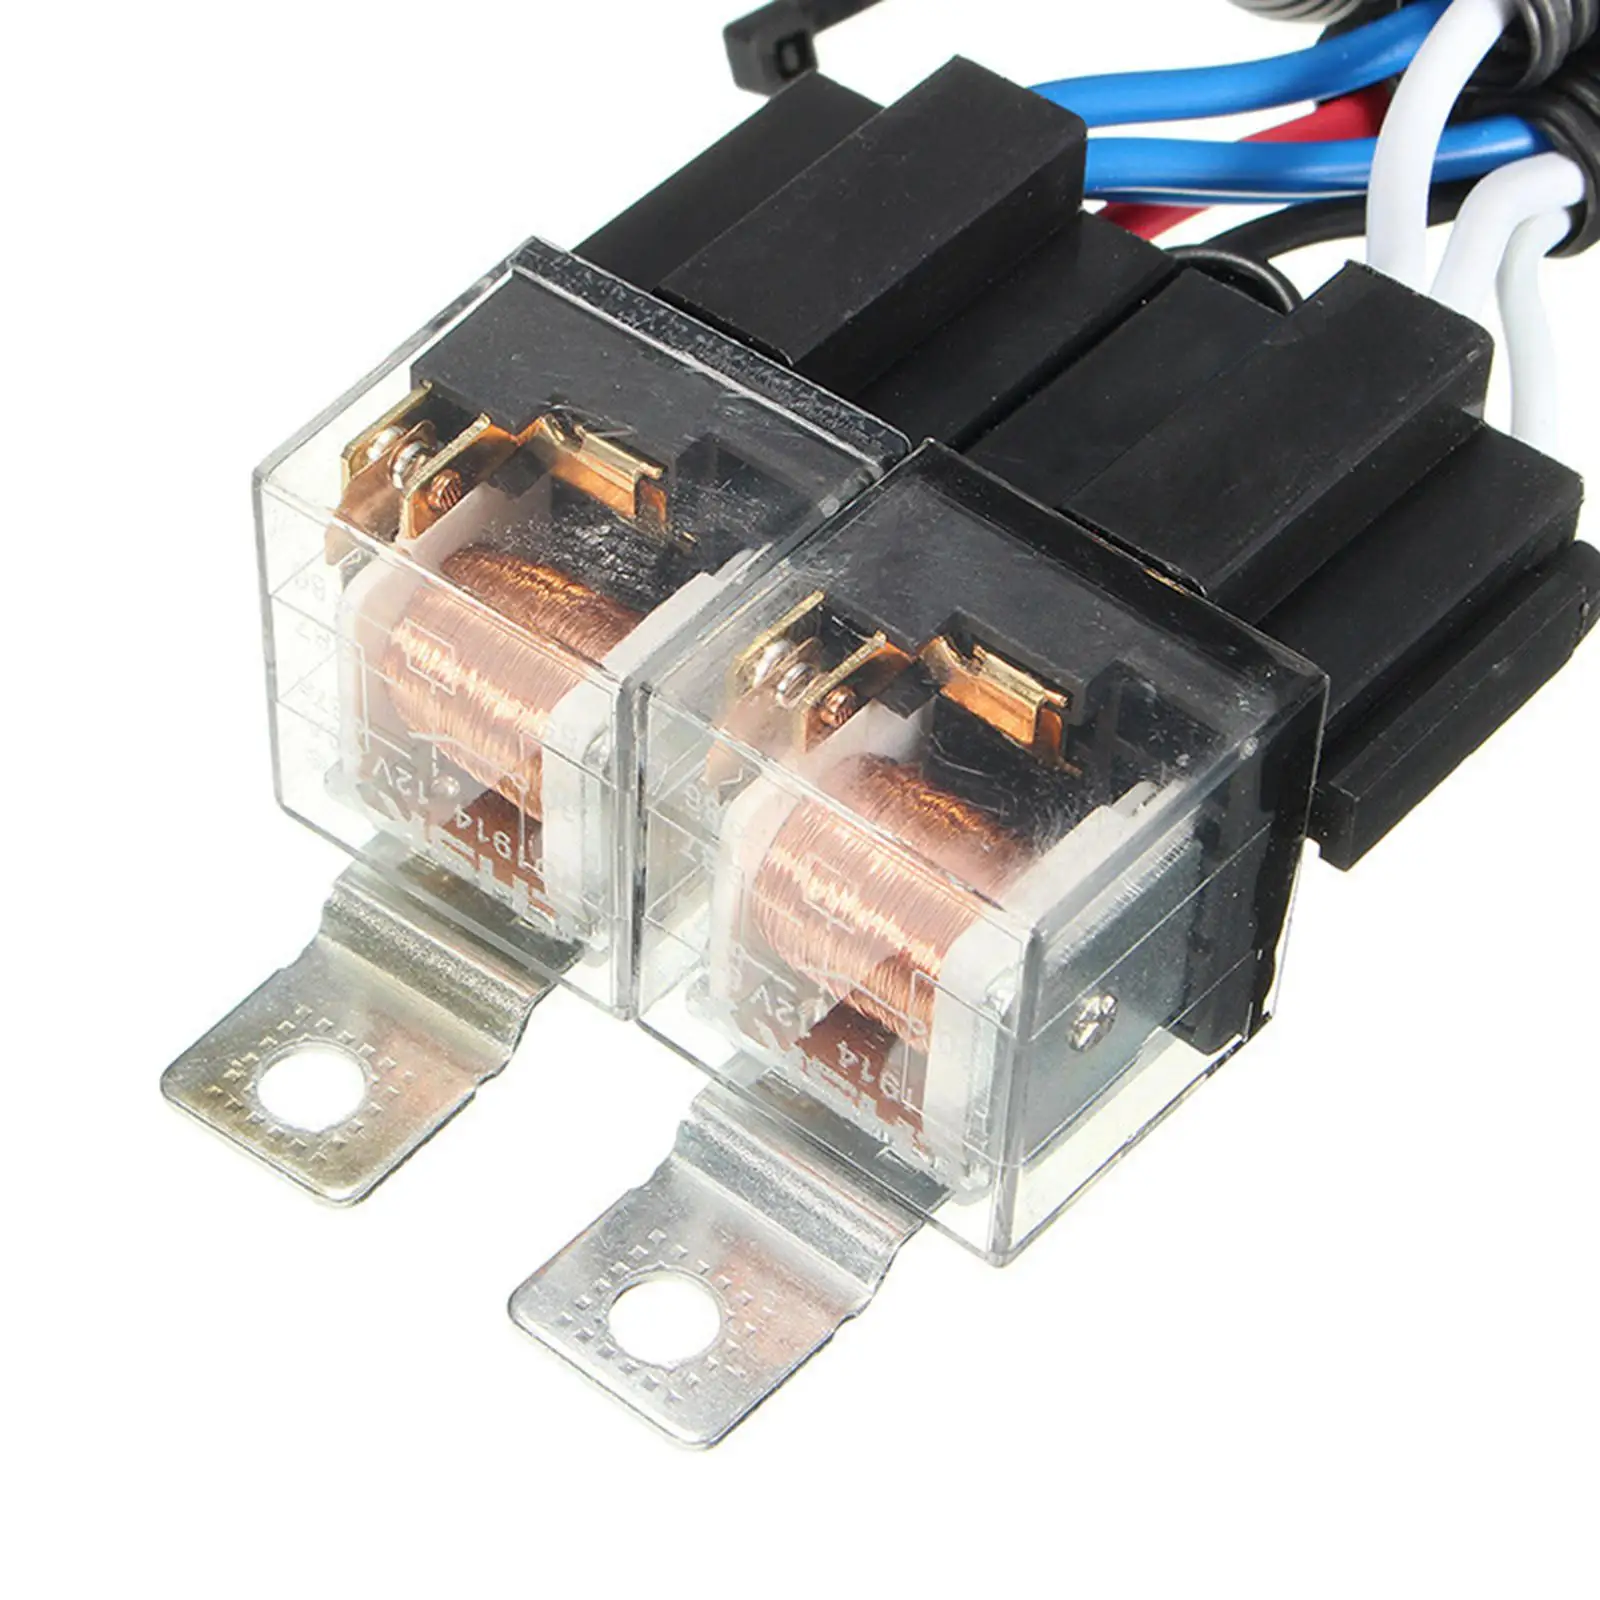 Automotive H4 Headlight Relay Harness Replacement High Quality Ceramic Socket